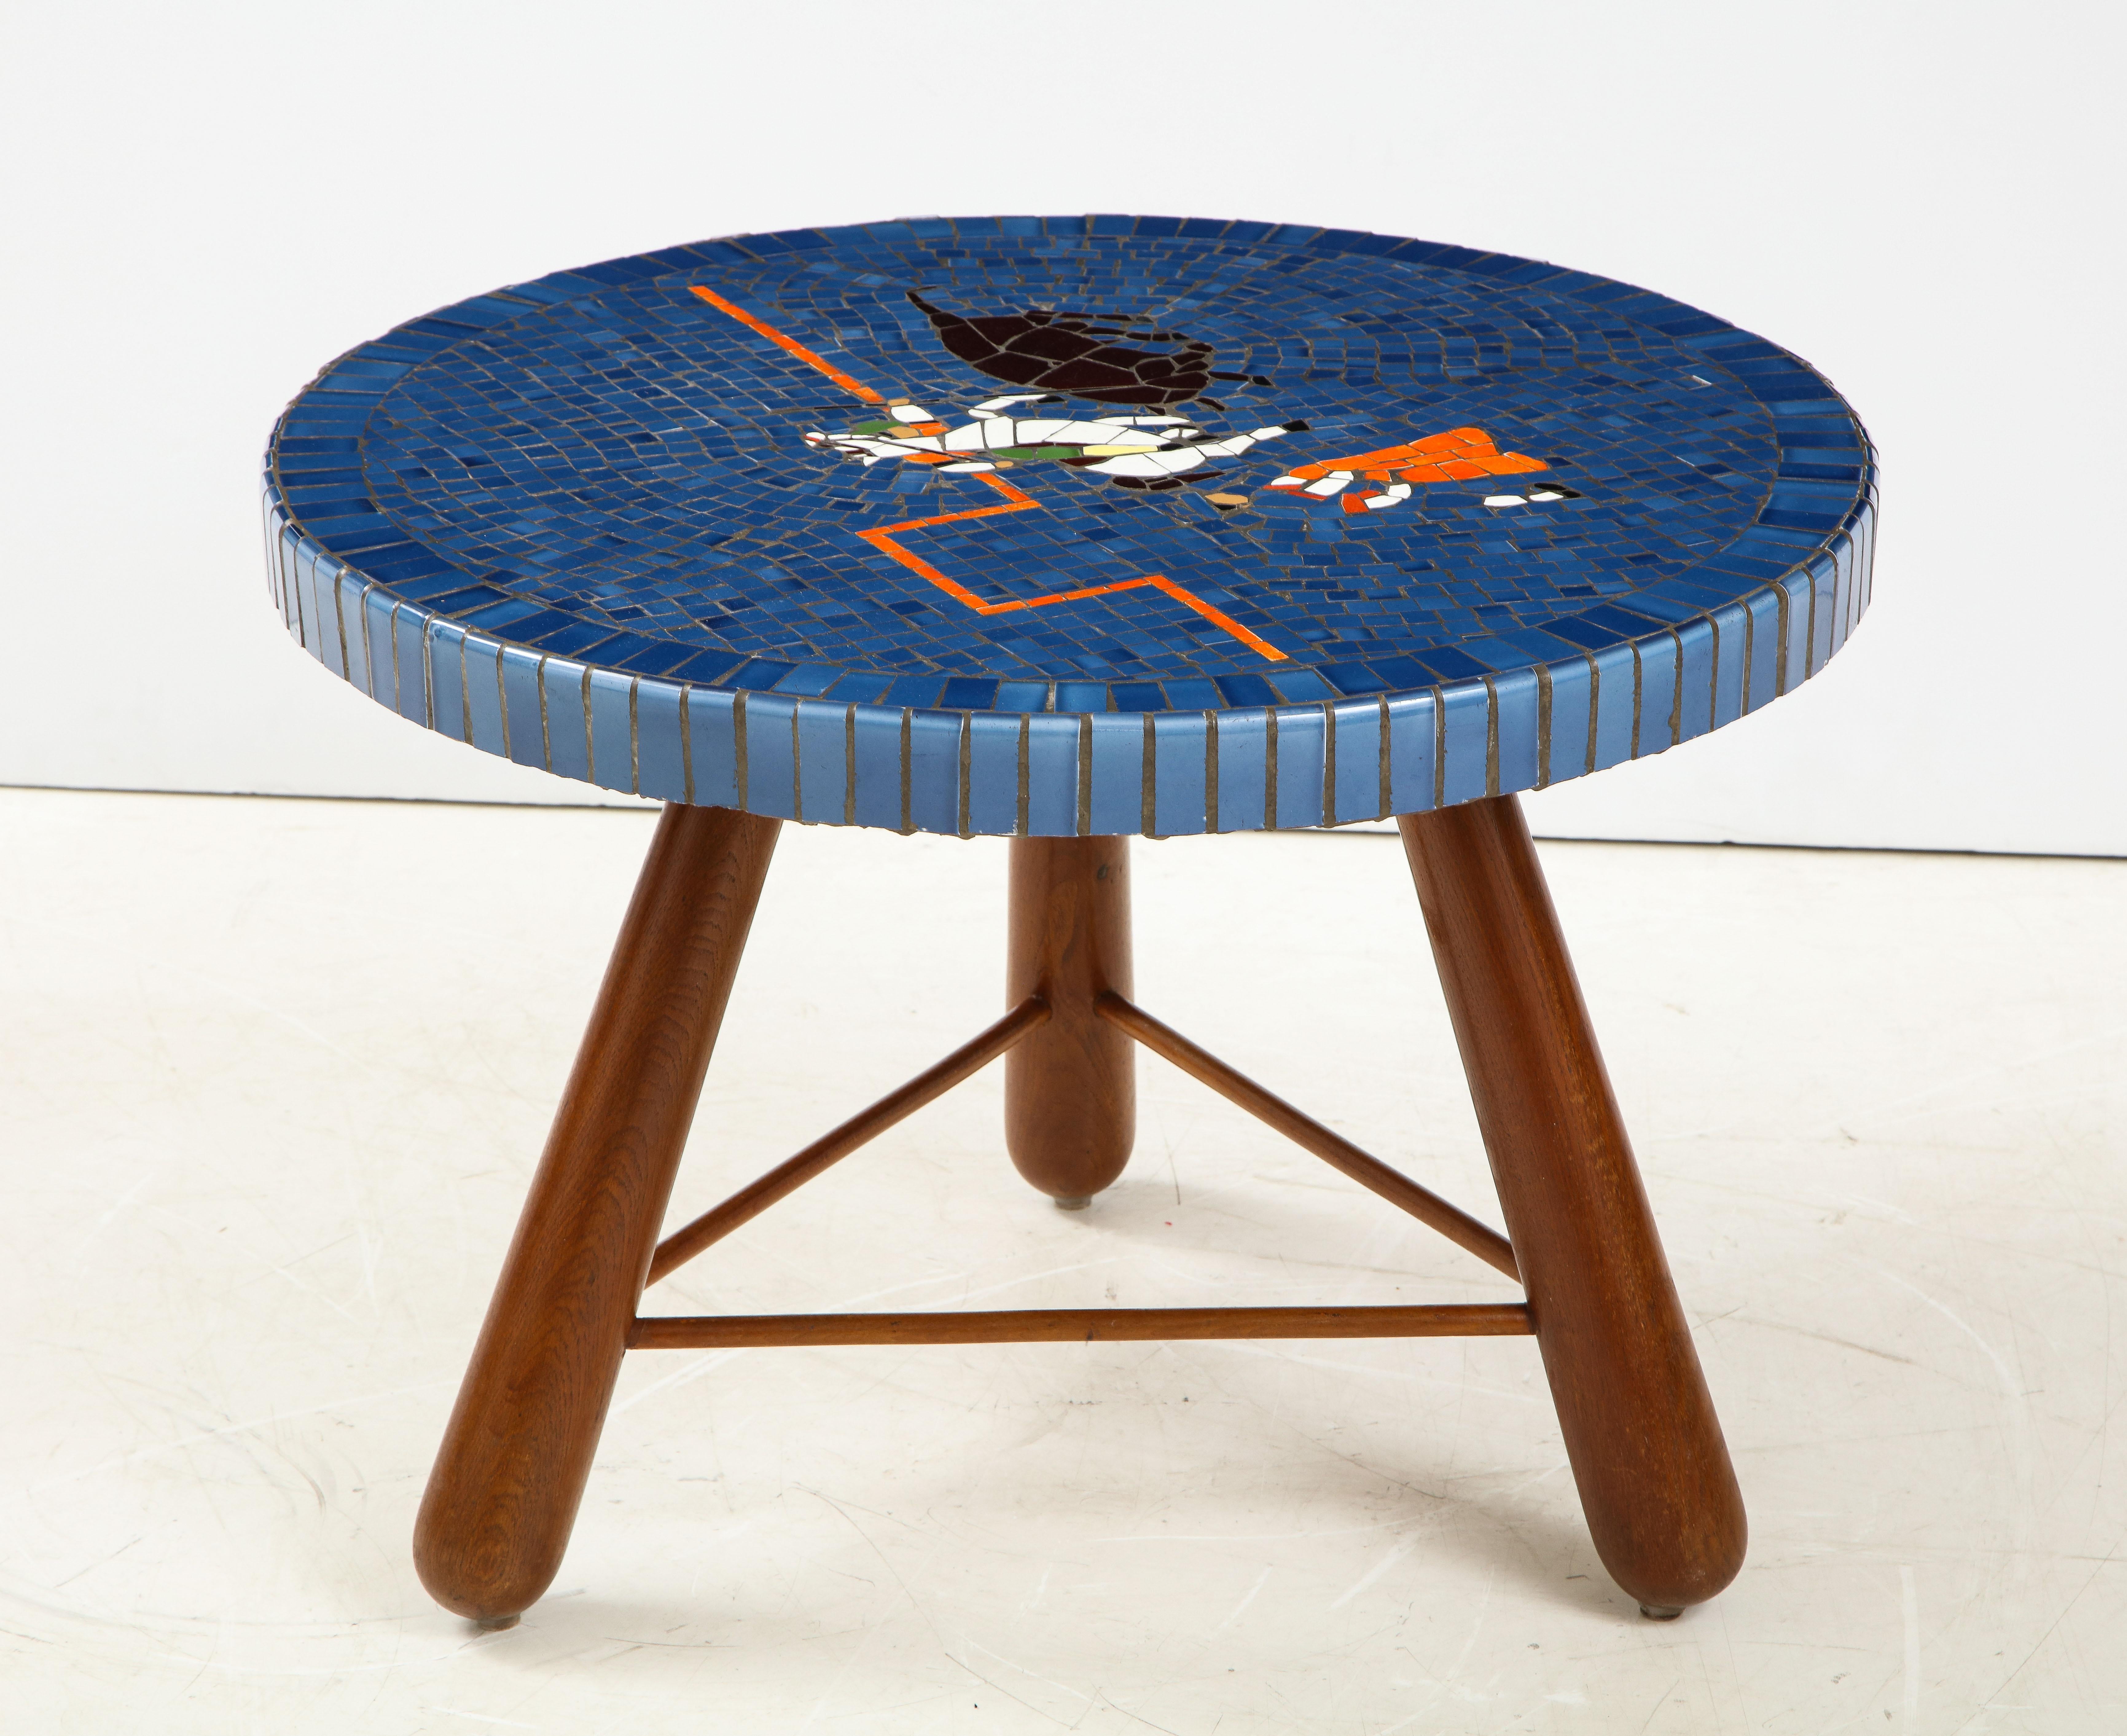 Scandinavian Modern Danish Tile Top and Oak Side Table, attributed to Otto Færge, Circa 1940-1950